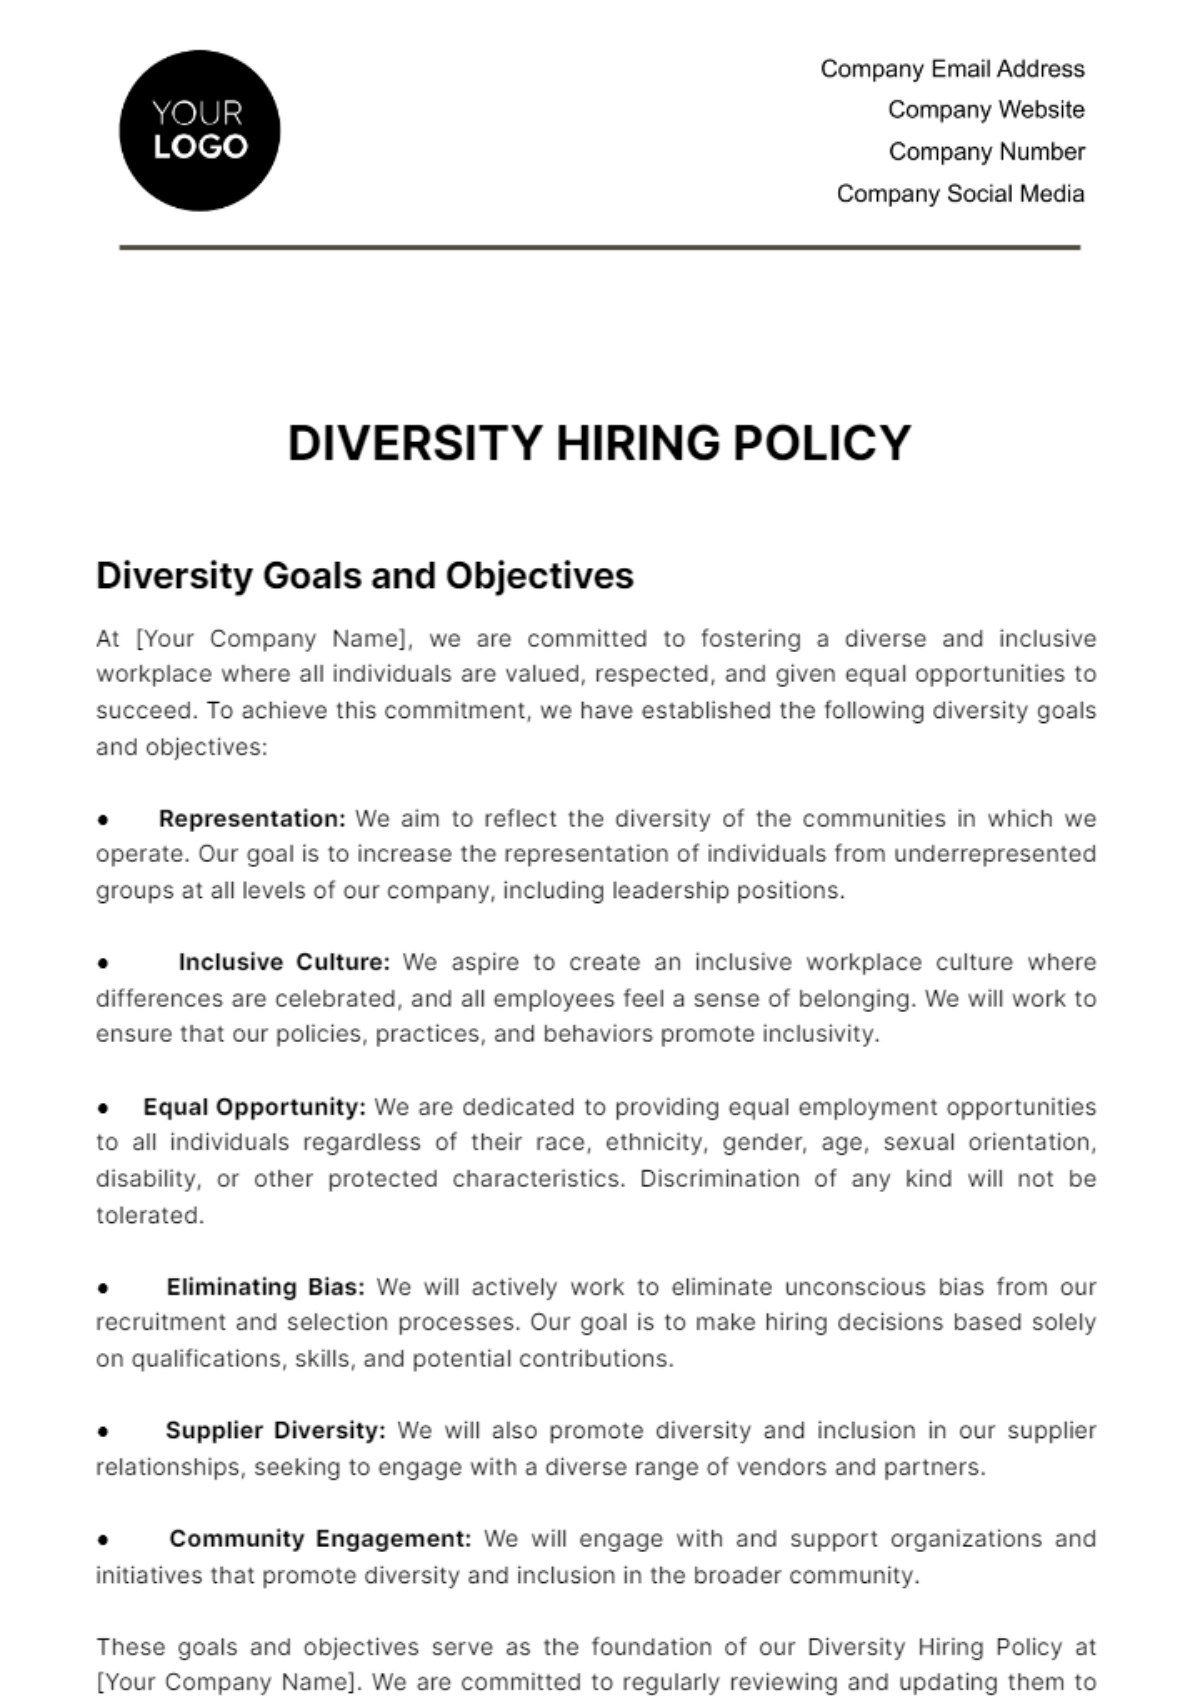 Diversity Hiring Policy HR Template